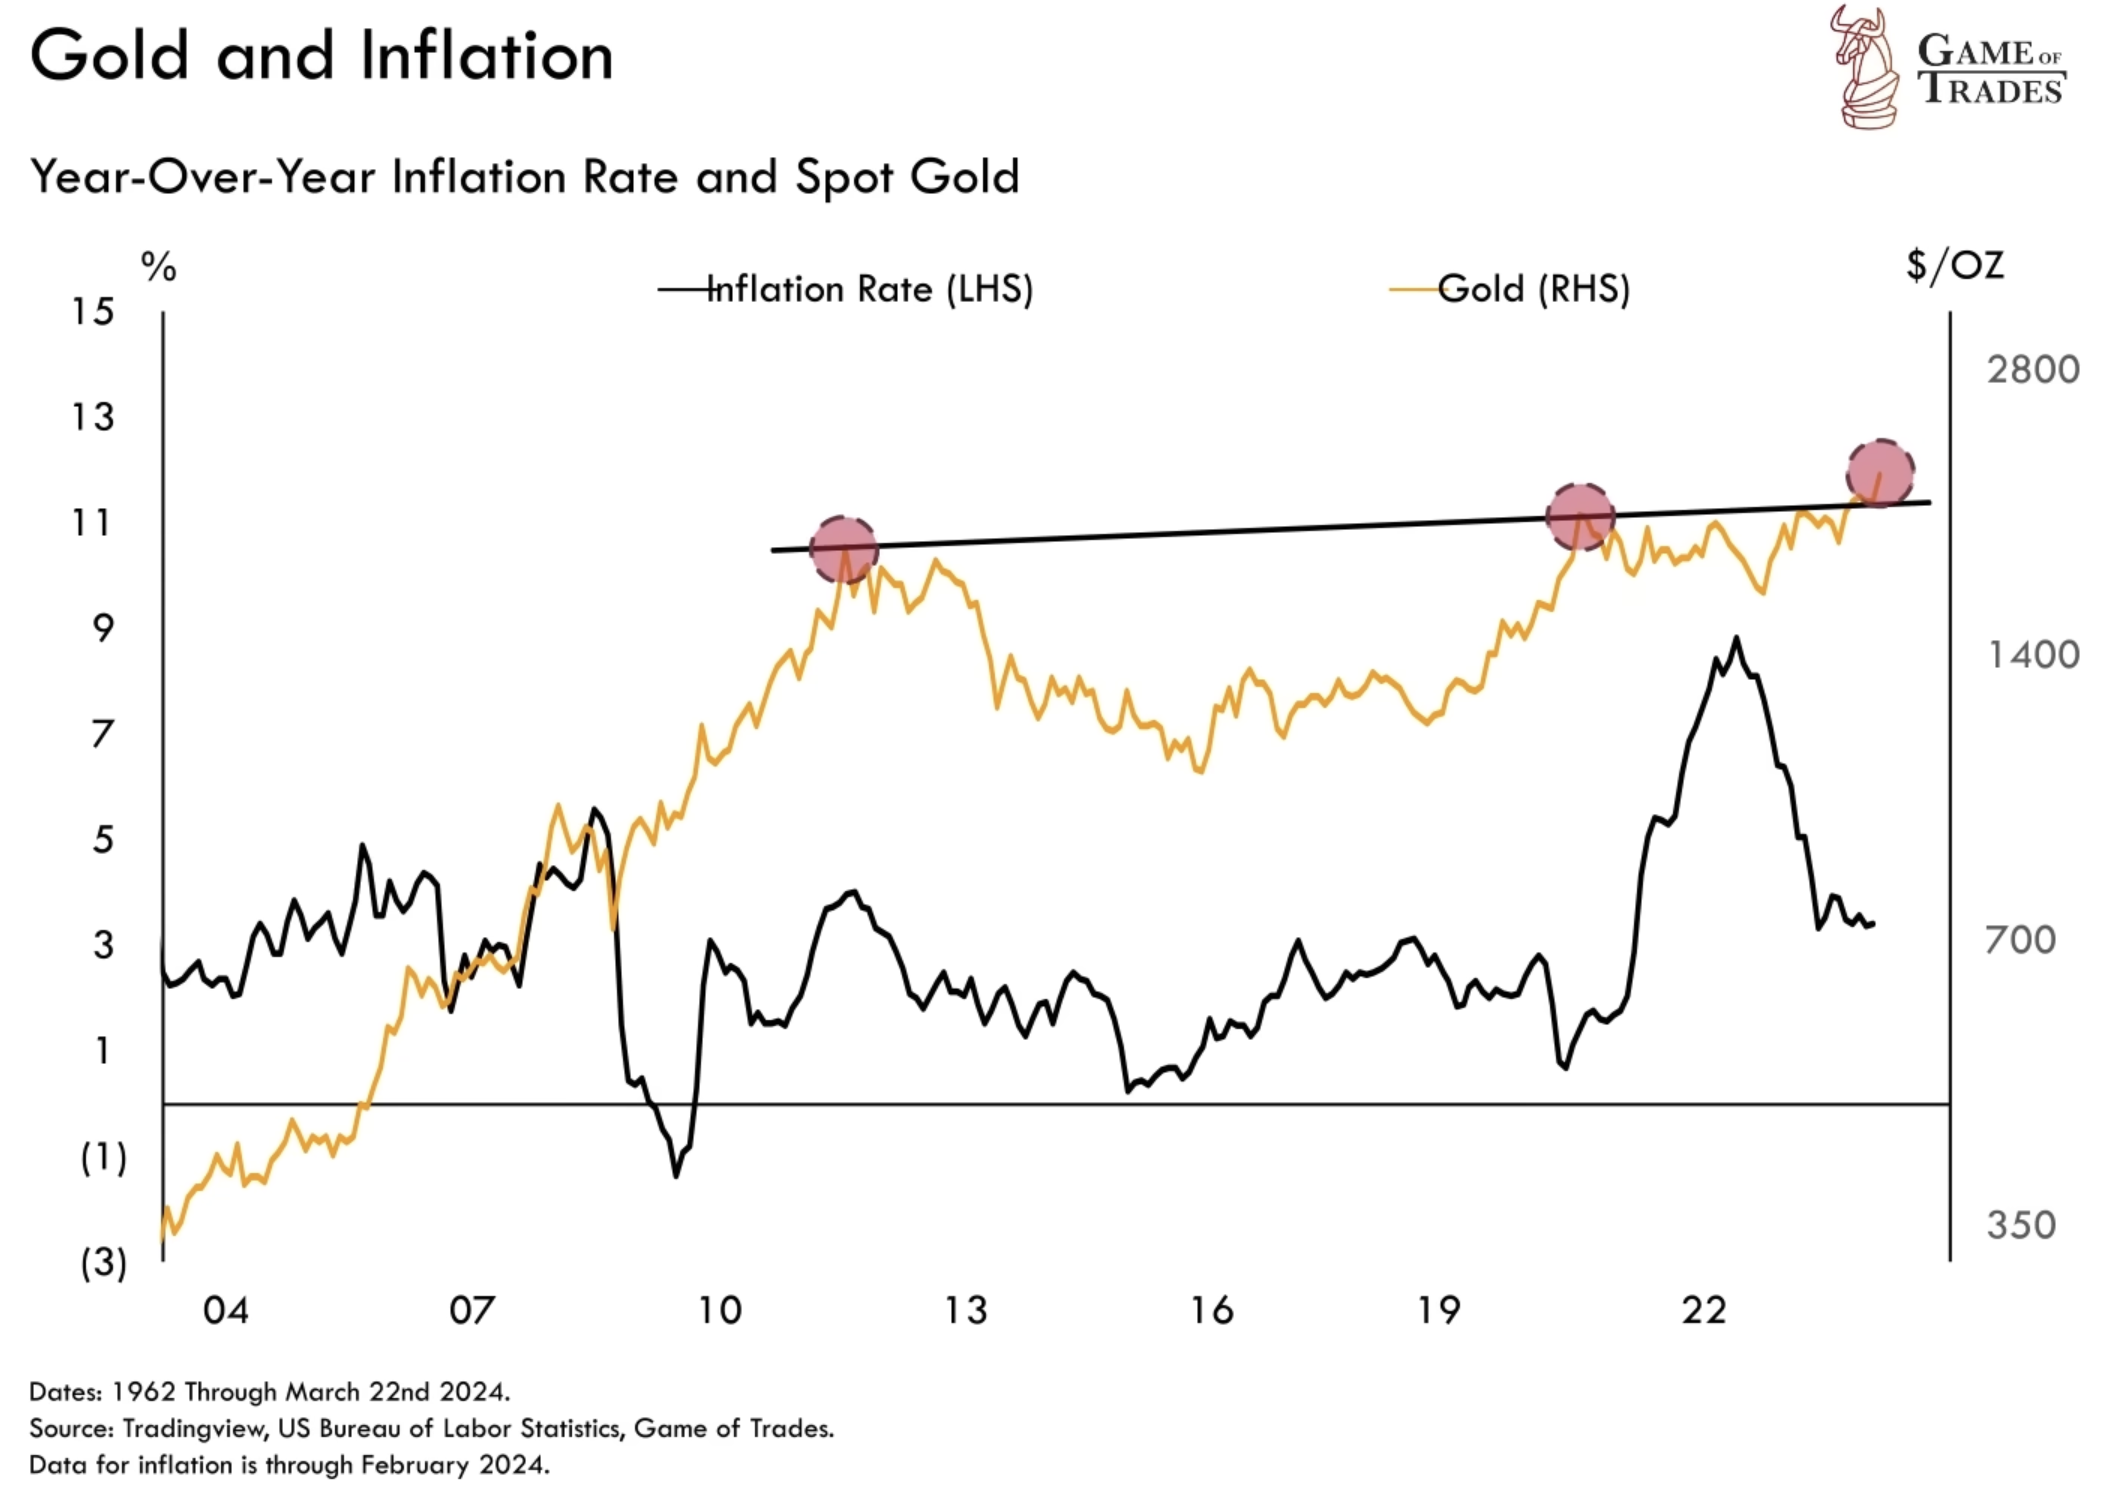 Inflation Rate and Spot Gold